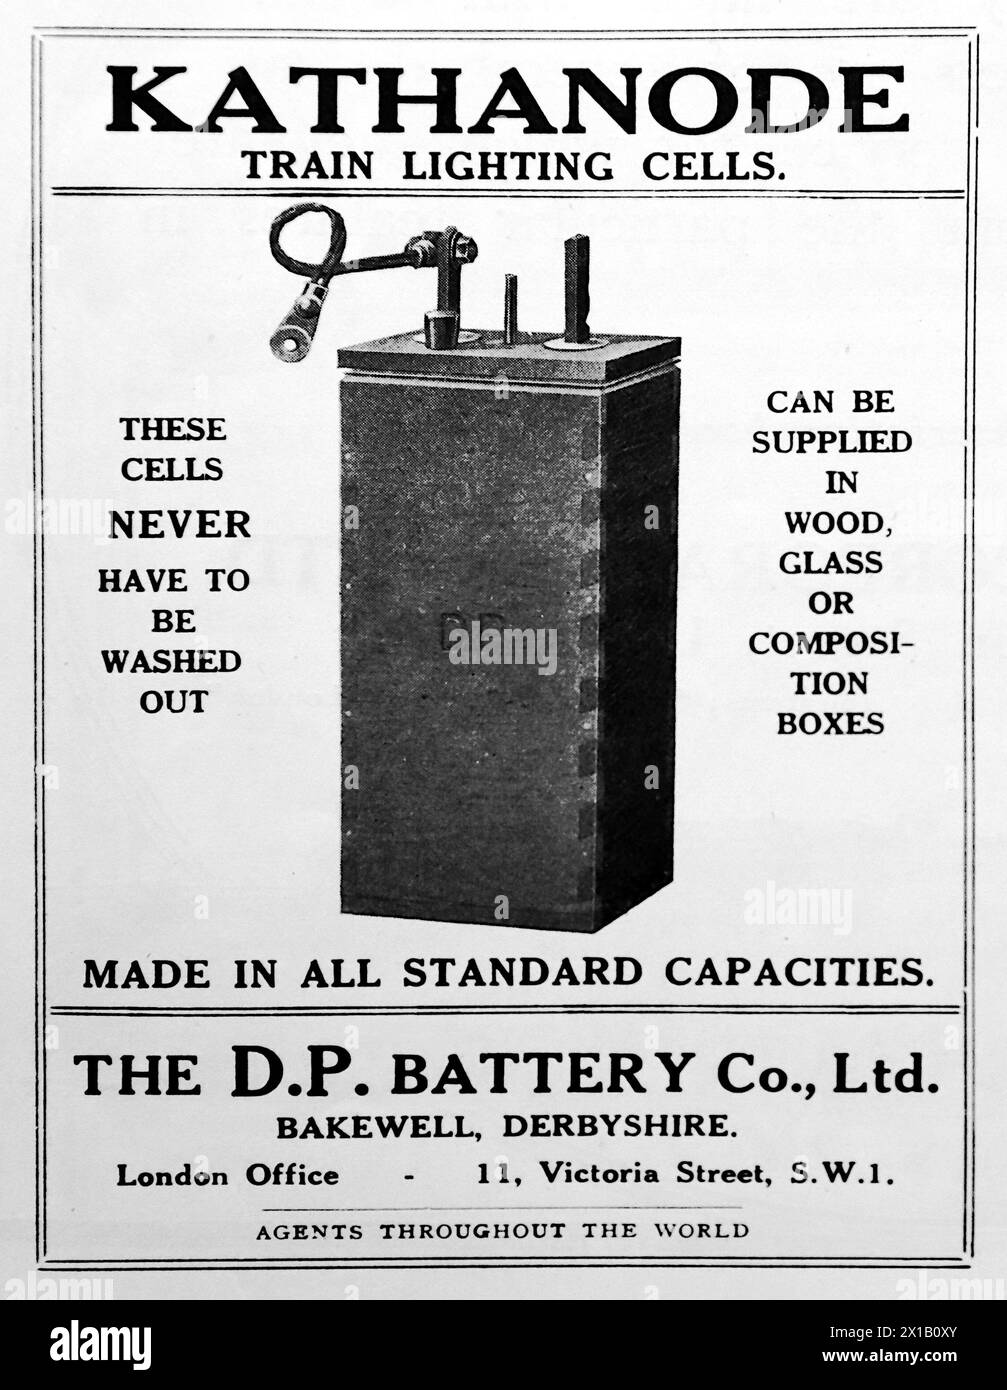 Advertisement for The D. P. Battery Company Limited of Bakewell, Derbyshire and Victoria Street, London. Kathanode train lighting cells. From an original publication dated 15 May 1924, this helps to give an insight into public transport, and the railways in particular, of the 1920s. Stock Photo